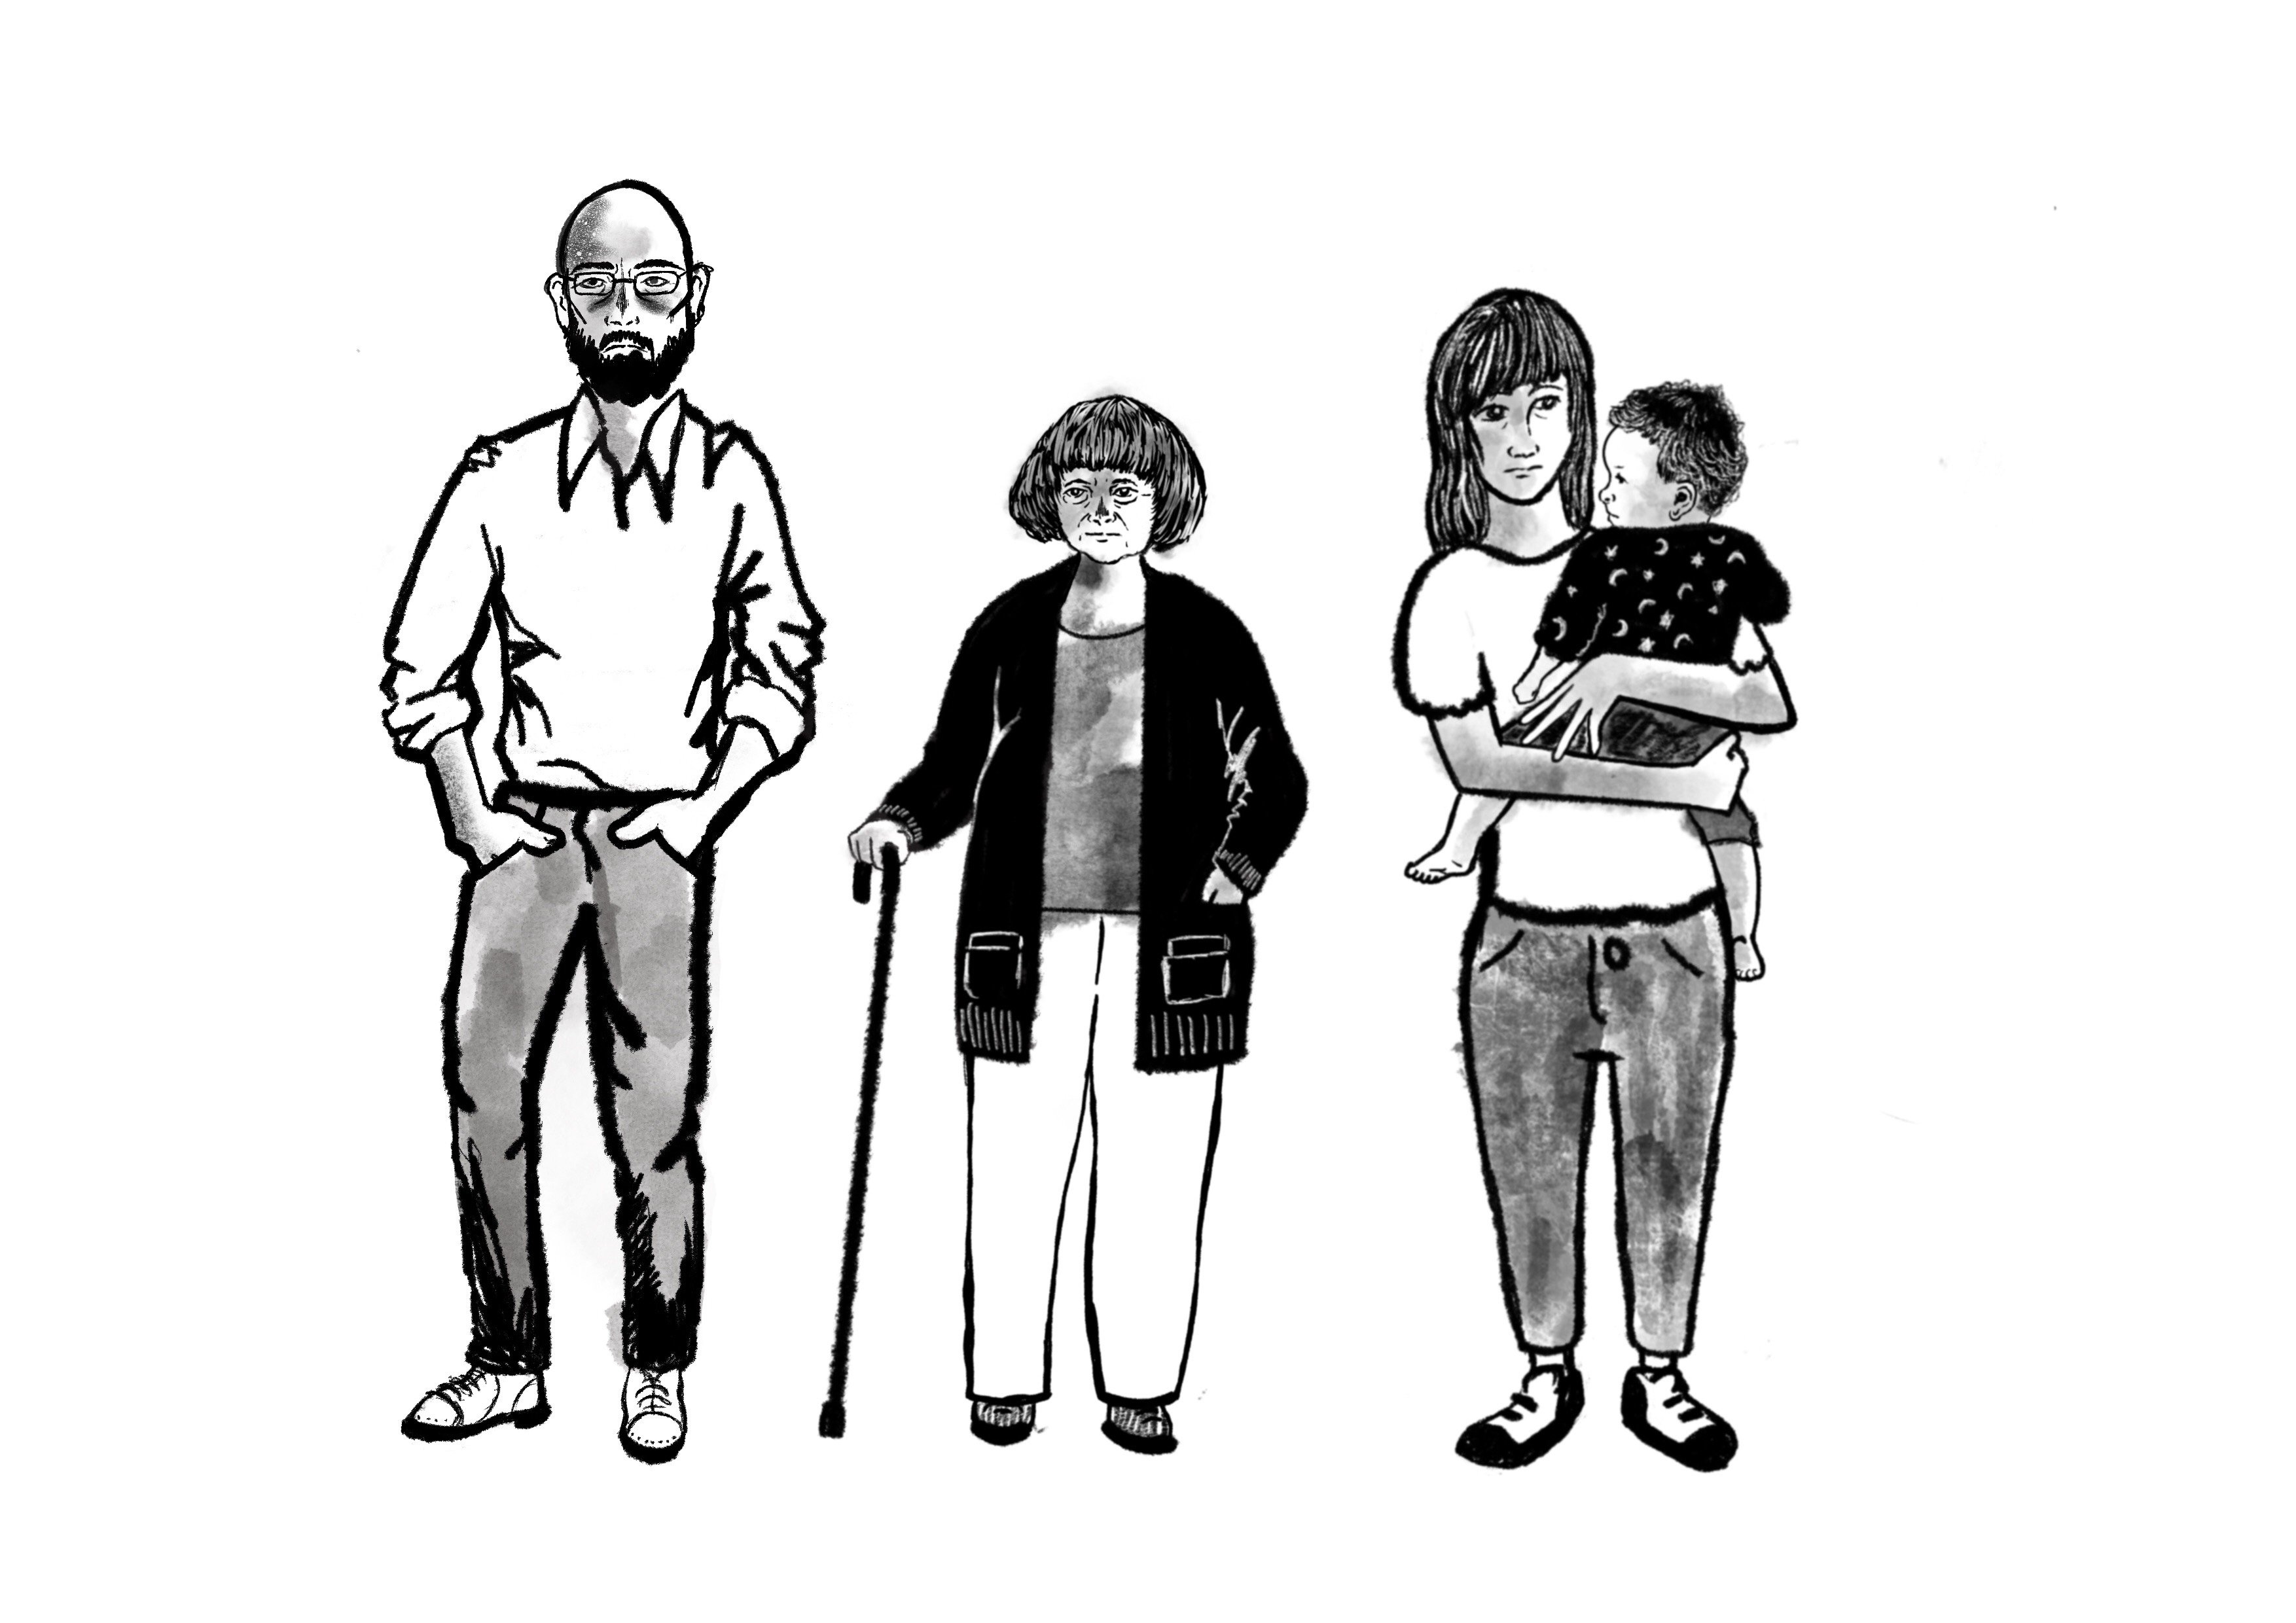 Group of people w/ experiences of claiming #UniversalCredit Documenting experiences. Developing recommendations for change. Illustrations by @hatillustration